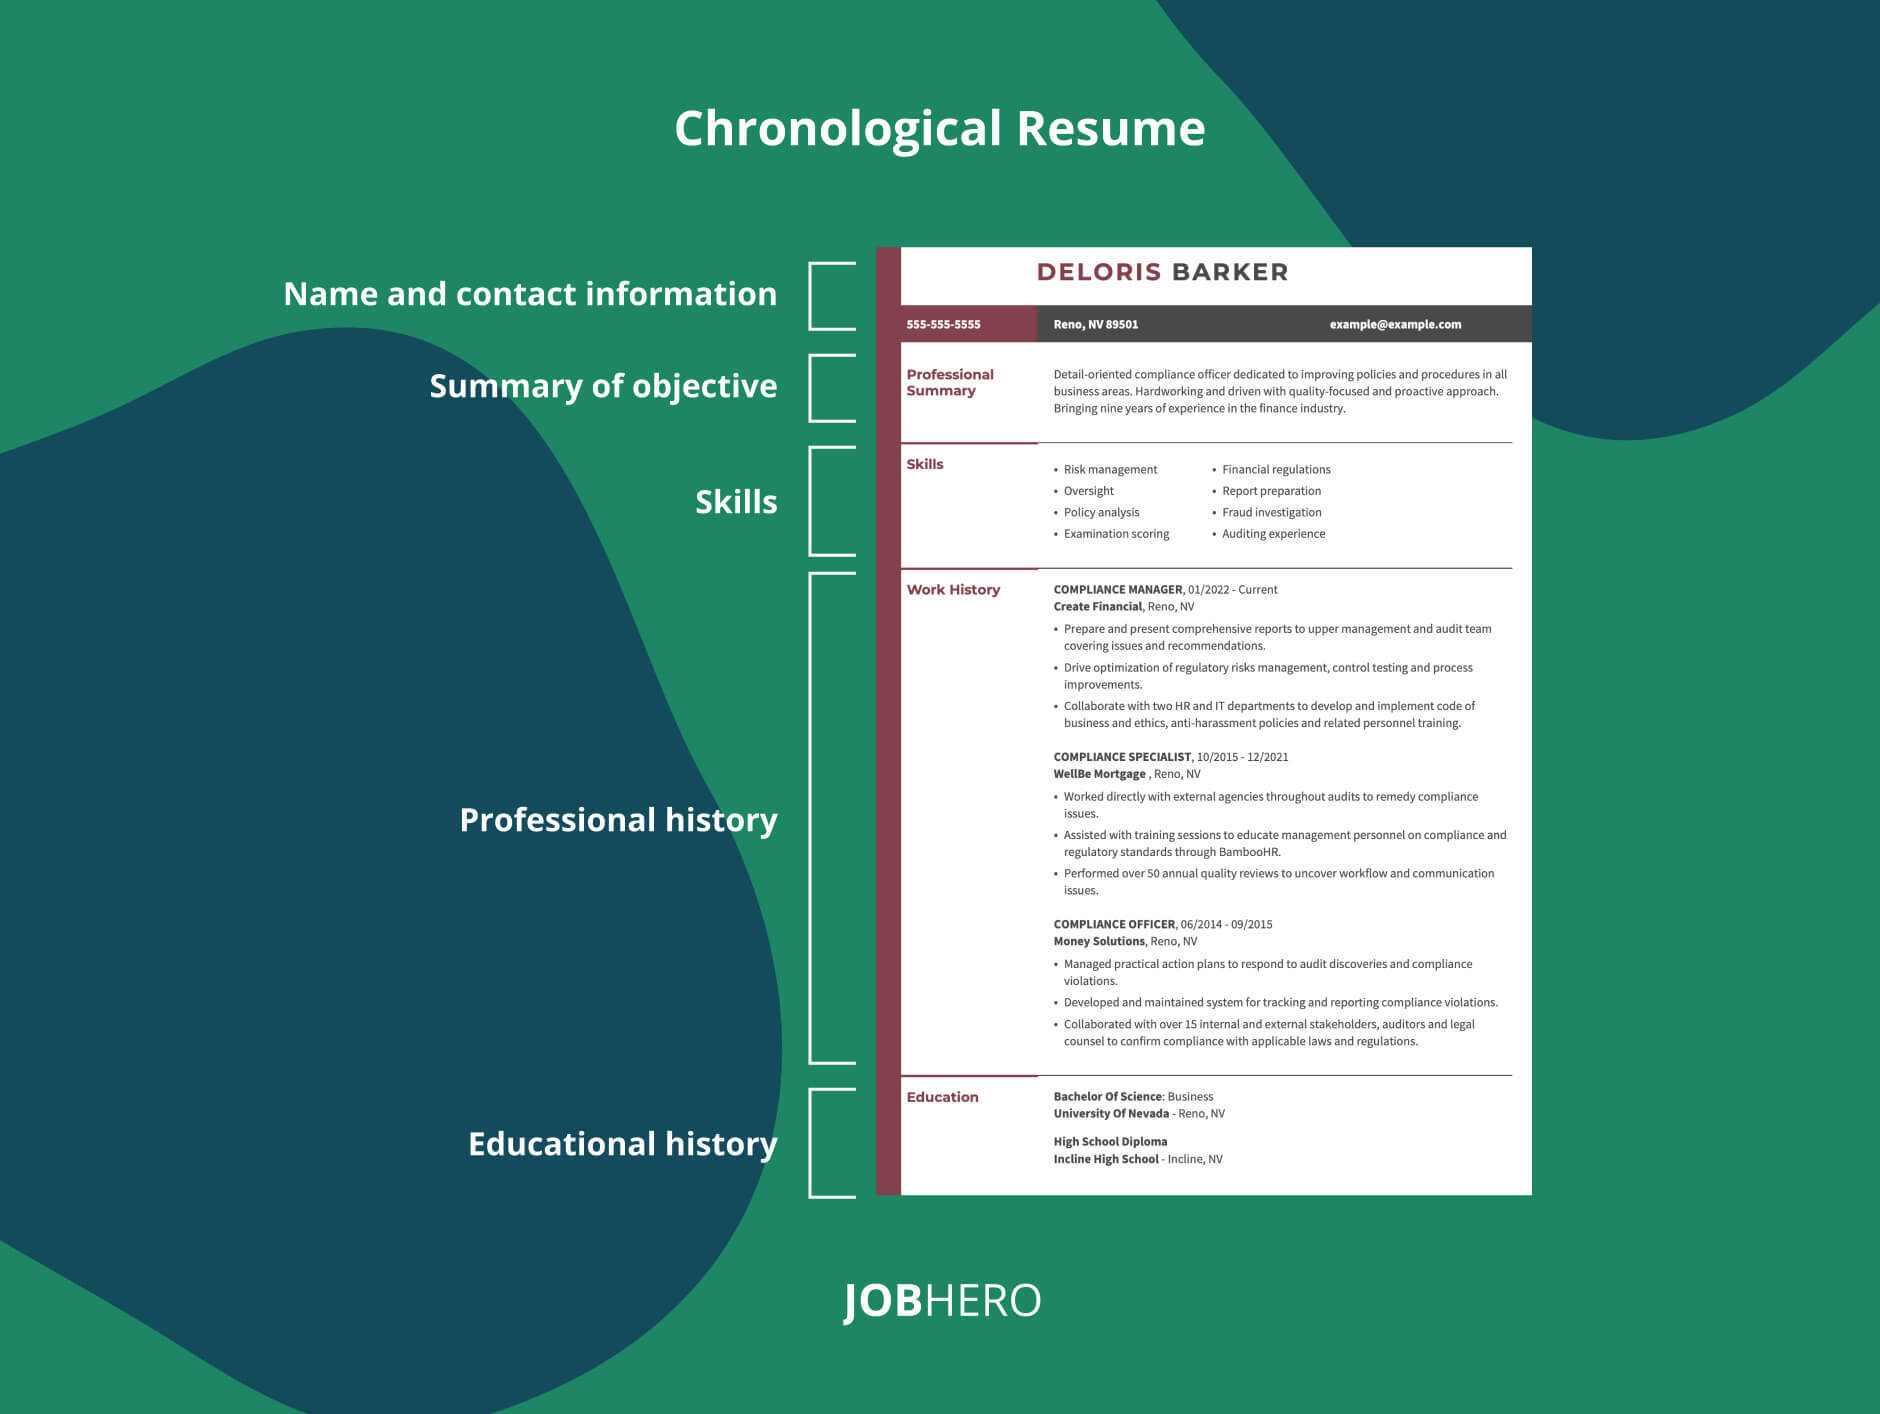 Chronological Resume Sections